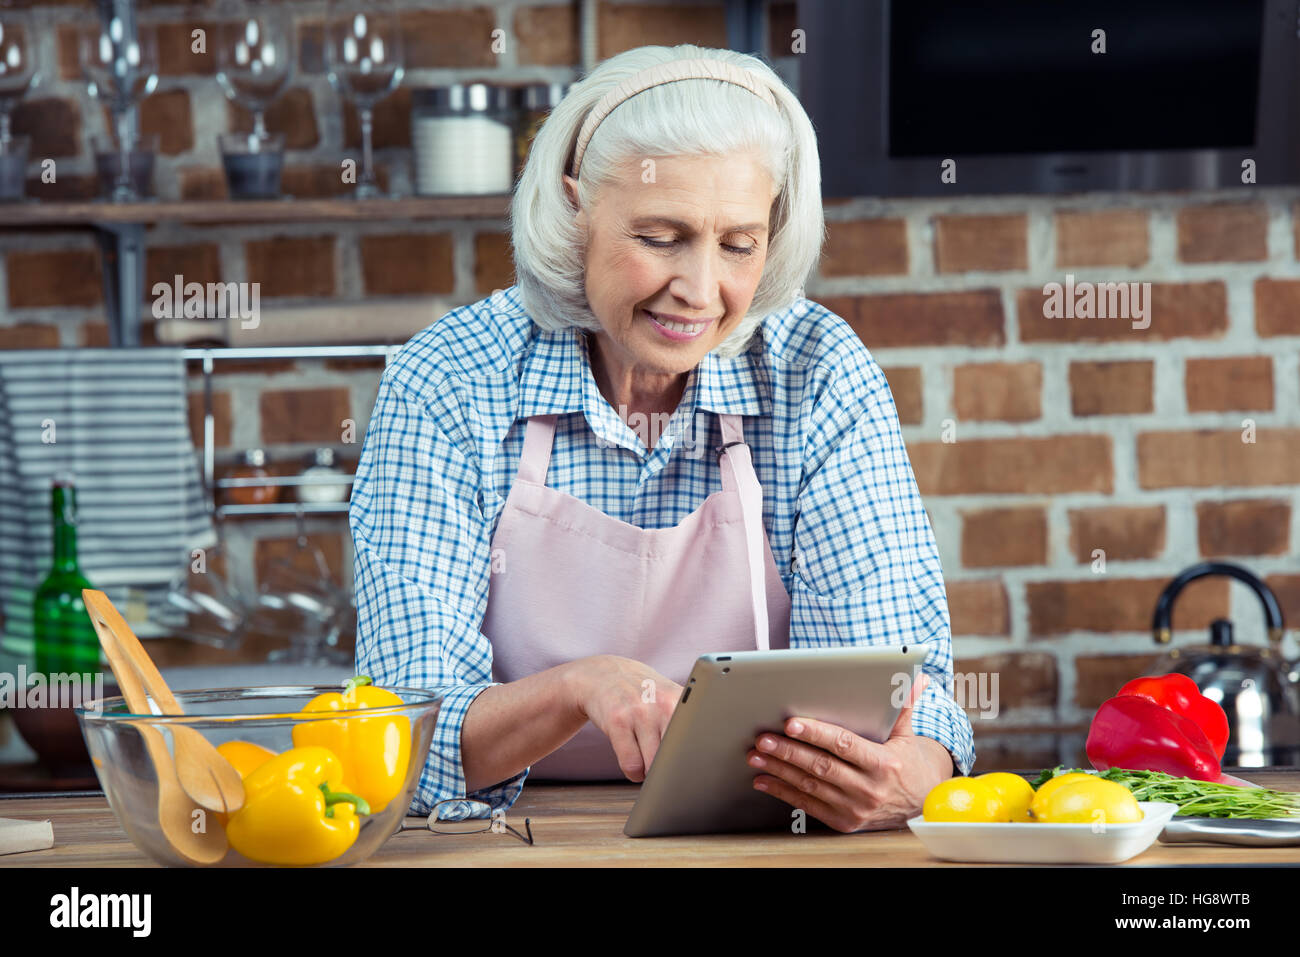 Smiling senior woman in apron using digital tablet in kitchen Stock Photo